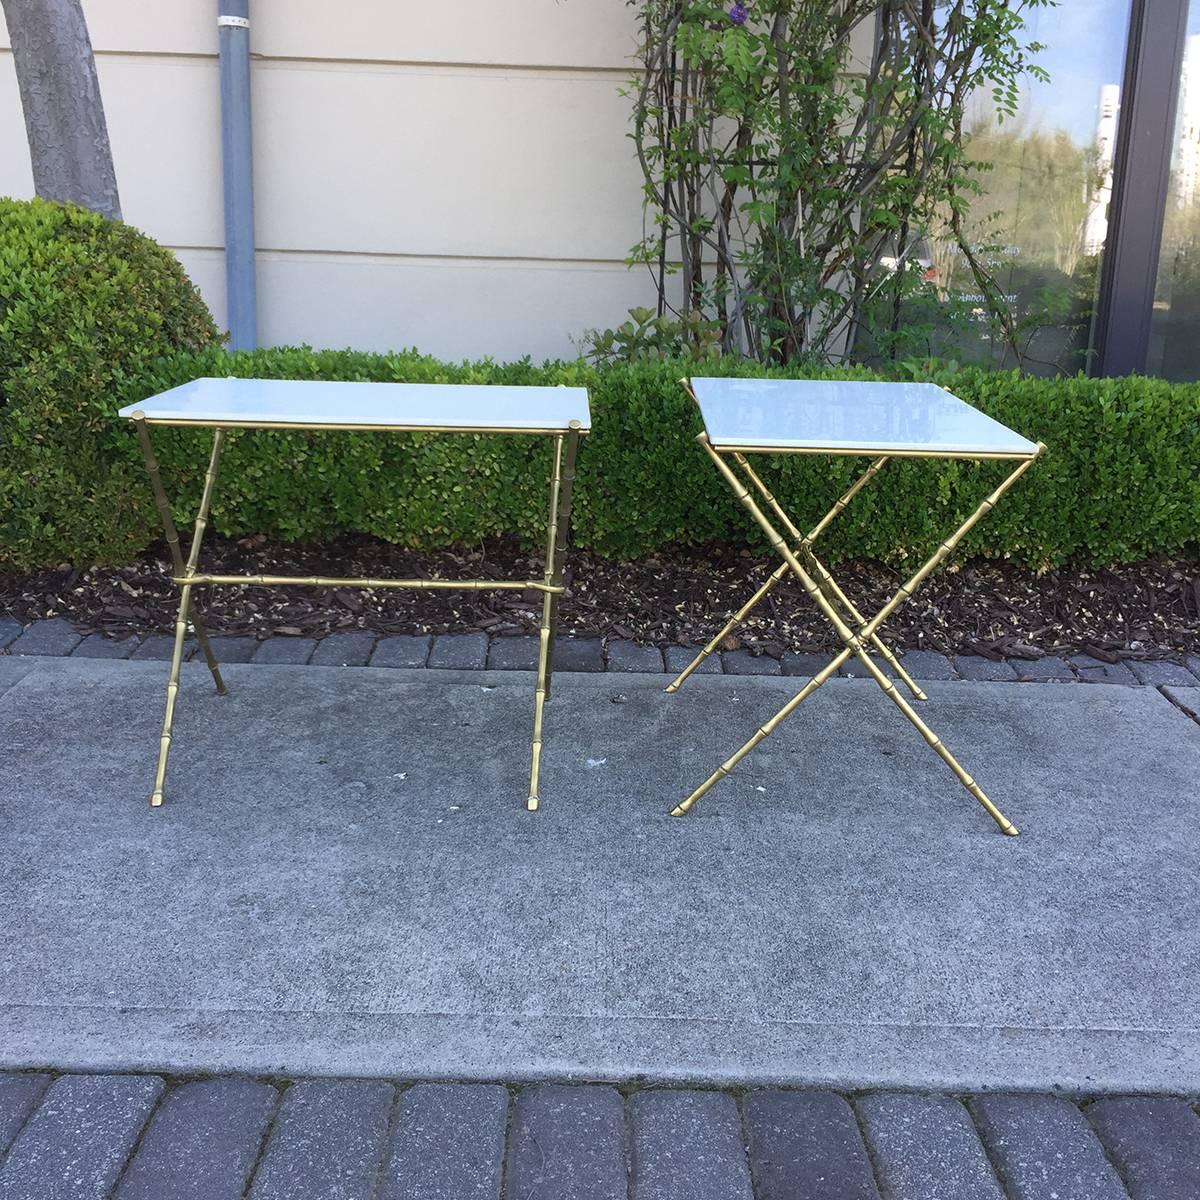 Pair of 1960s brass or bronze bamboo side tables attributed to Maison Jansen, with white tops, (black glass tops optional) see additional photos.